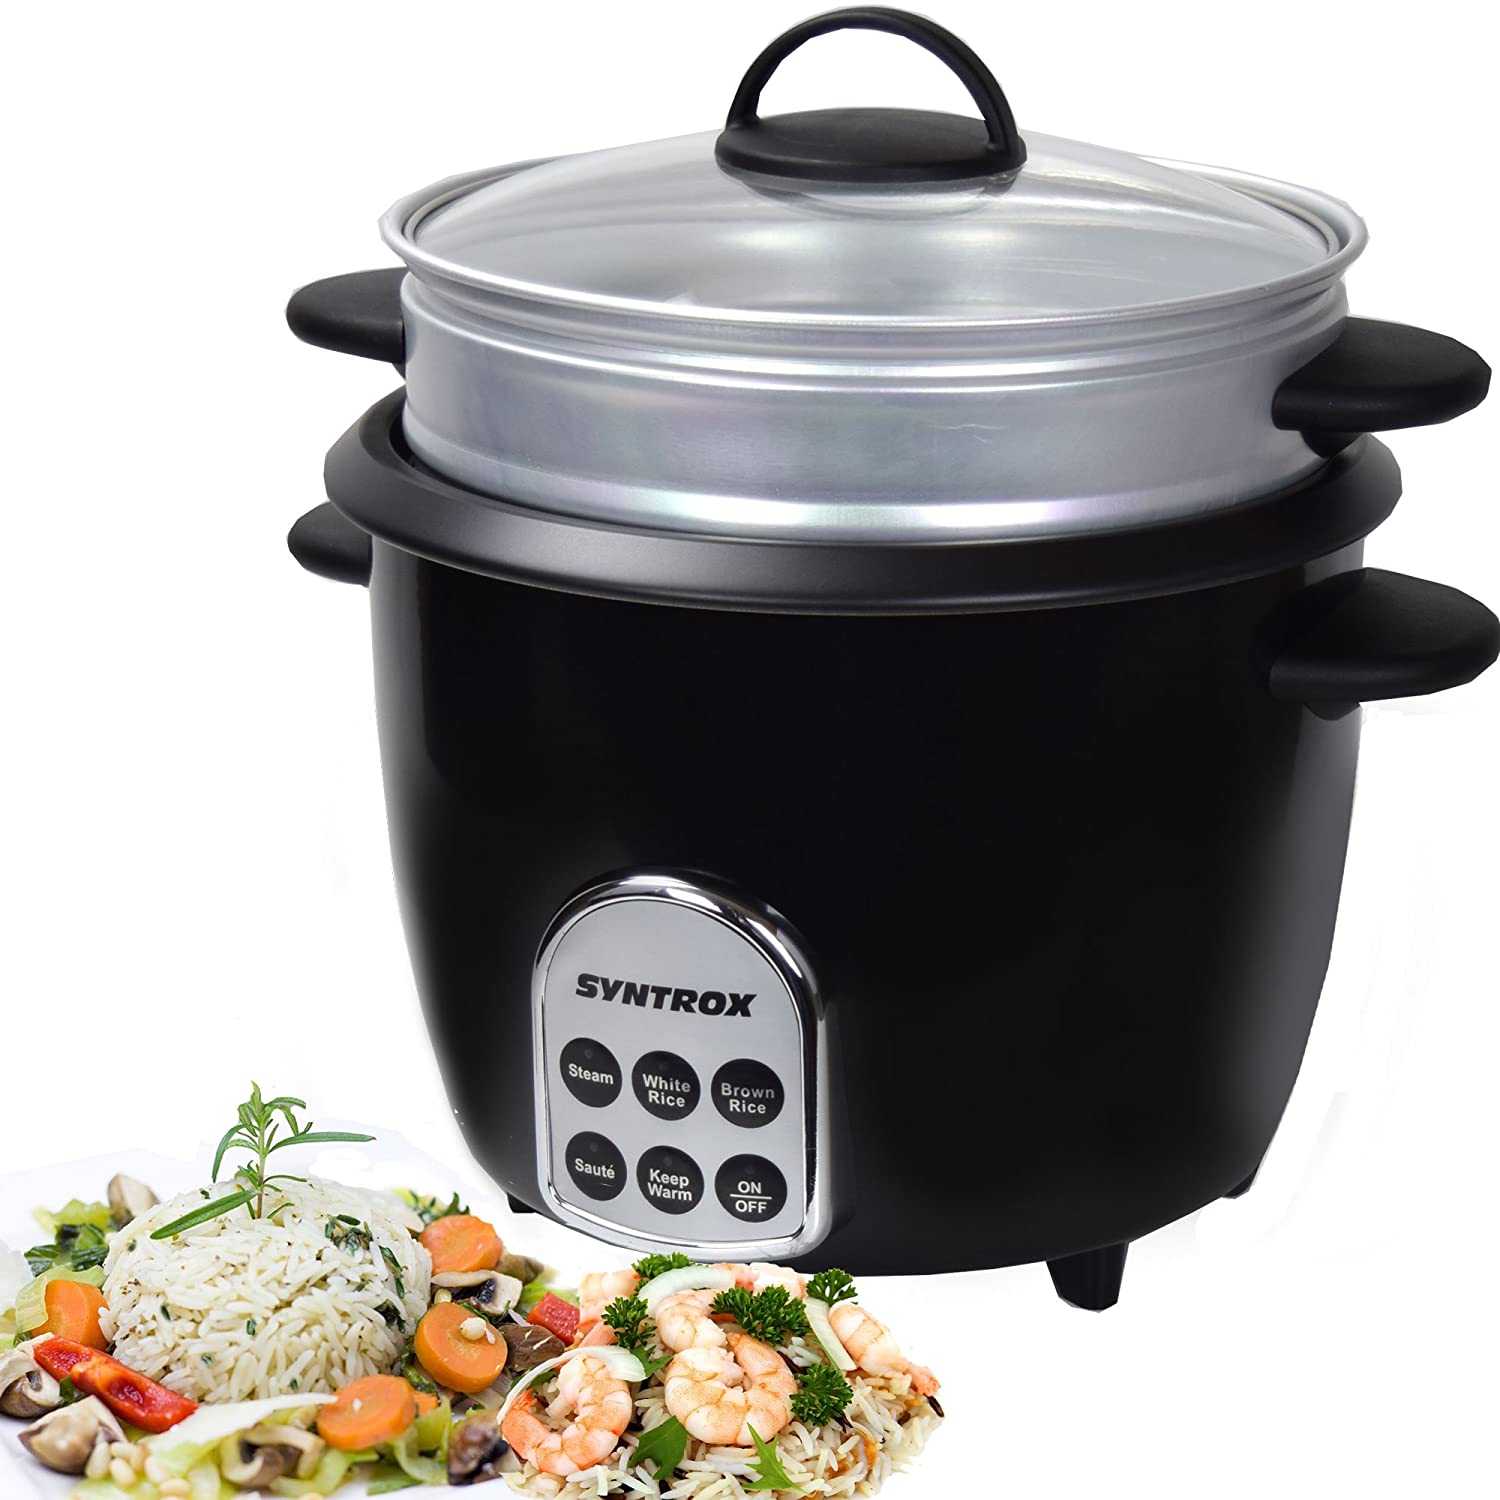 Syntrox Germany Slow Chef RC 700 W Gourmet Multi Cooker Multi Cooker Rice Cooker Steamer with Warming Function, 1.8 Litre, 700 Watt